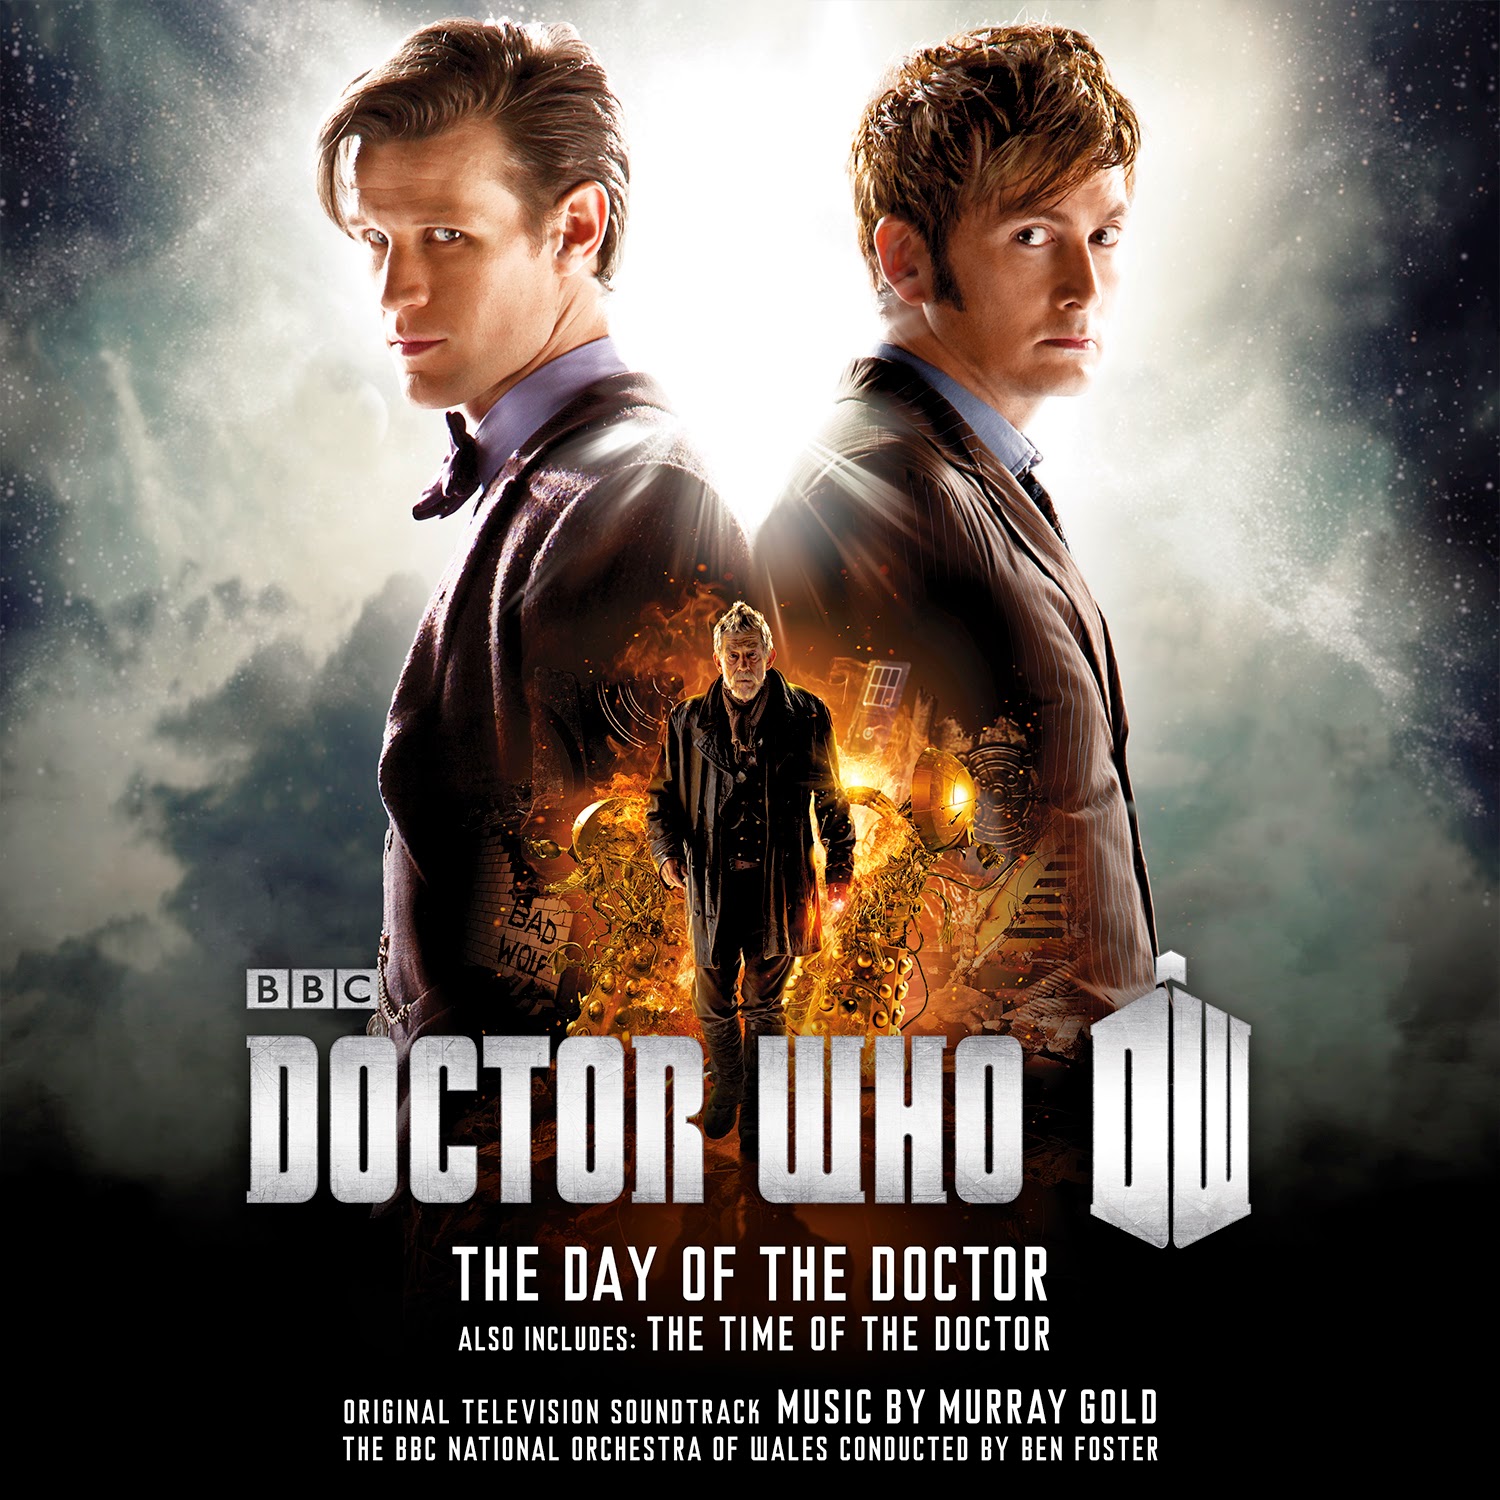 The Day of the Doctor and Time of the Doctor Soundtrack